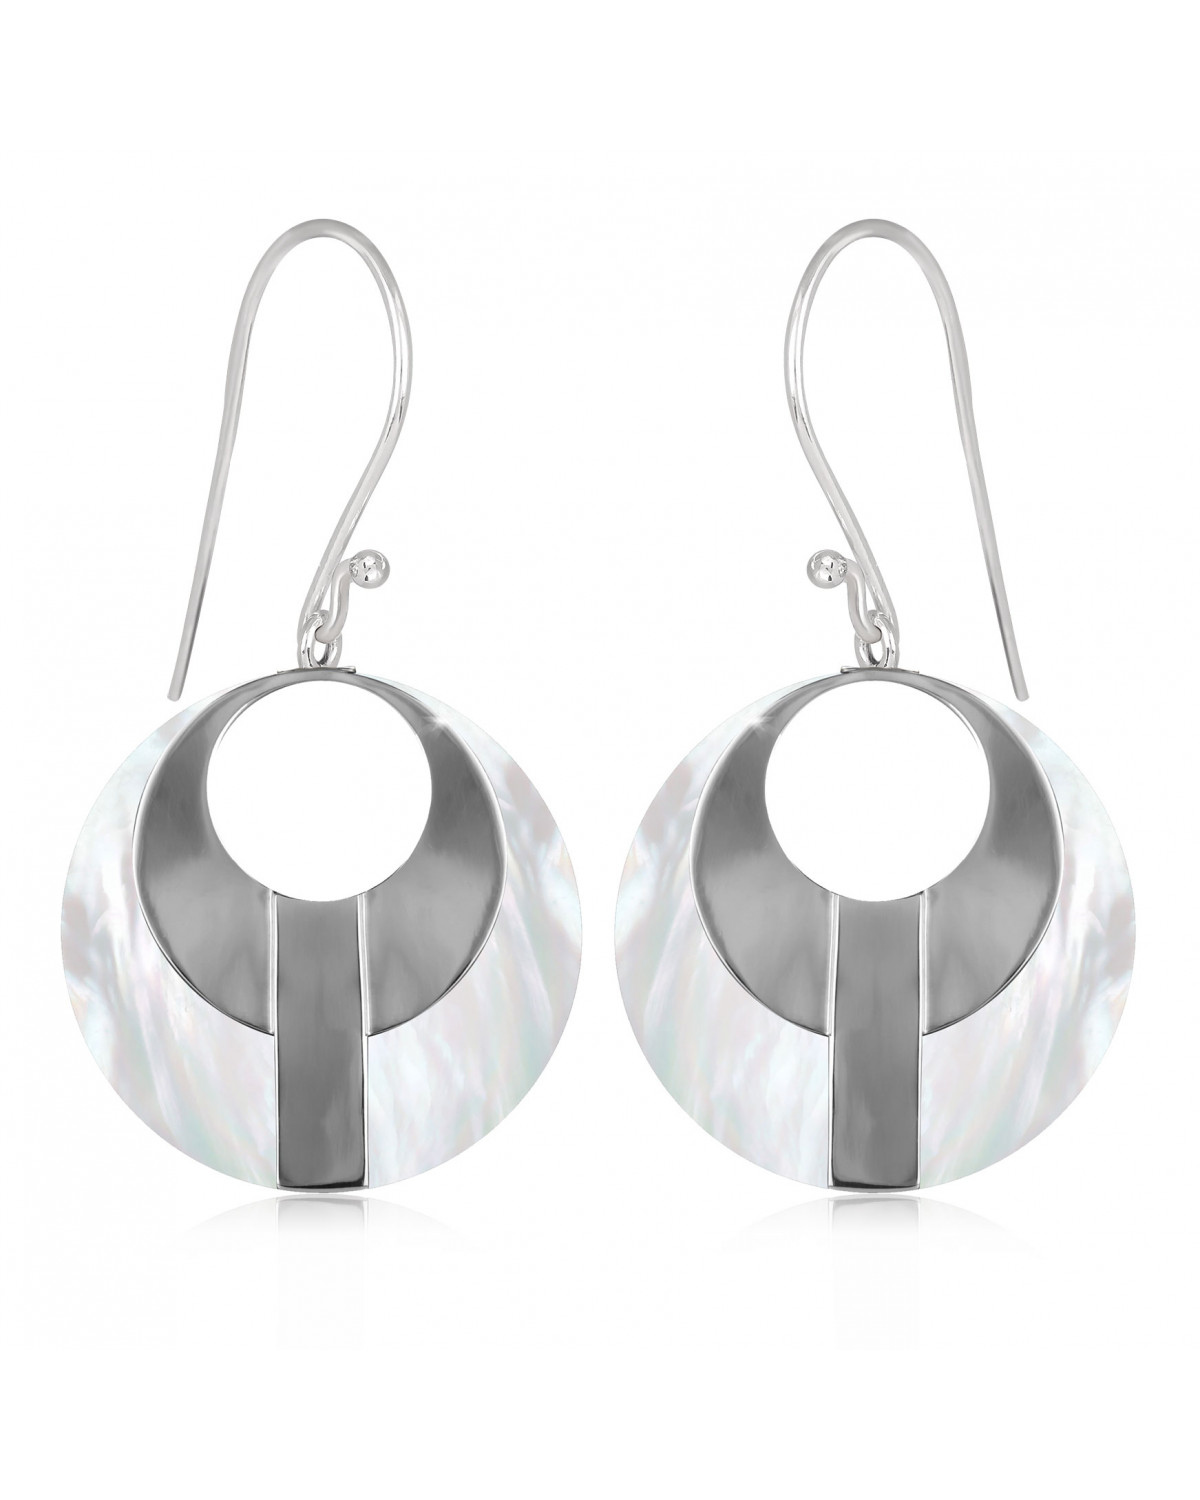 Earrings natural white mother-of-pearl round solid silver